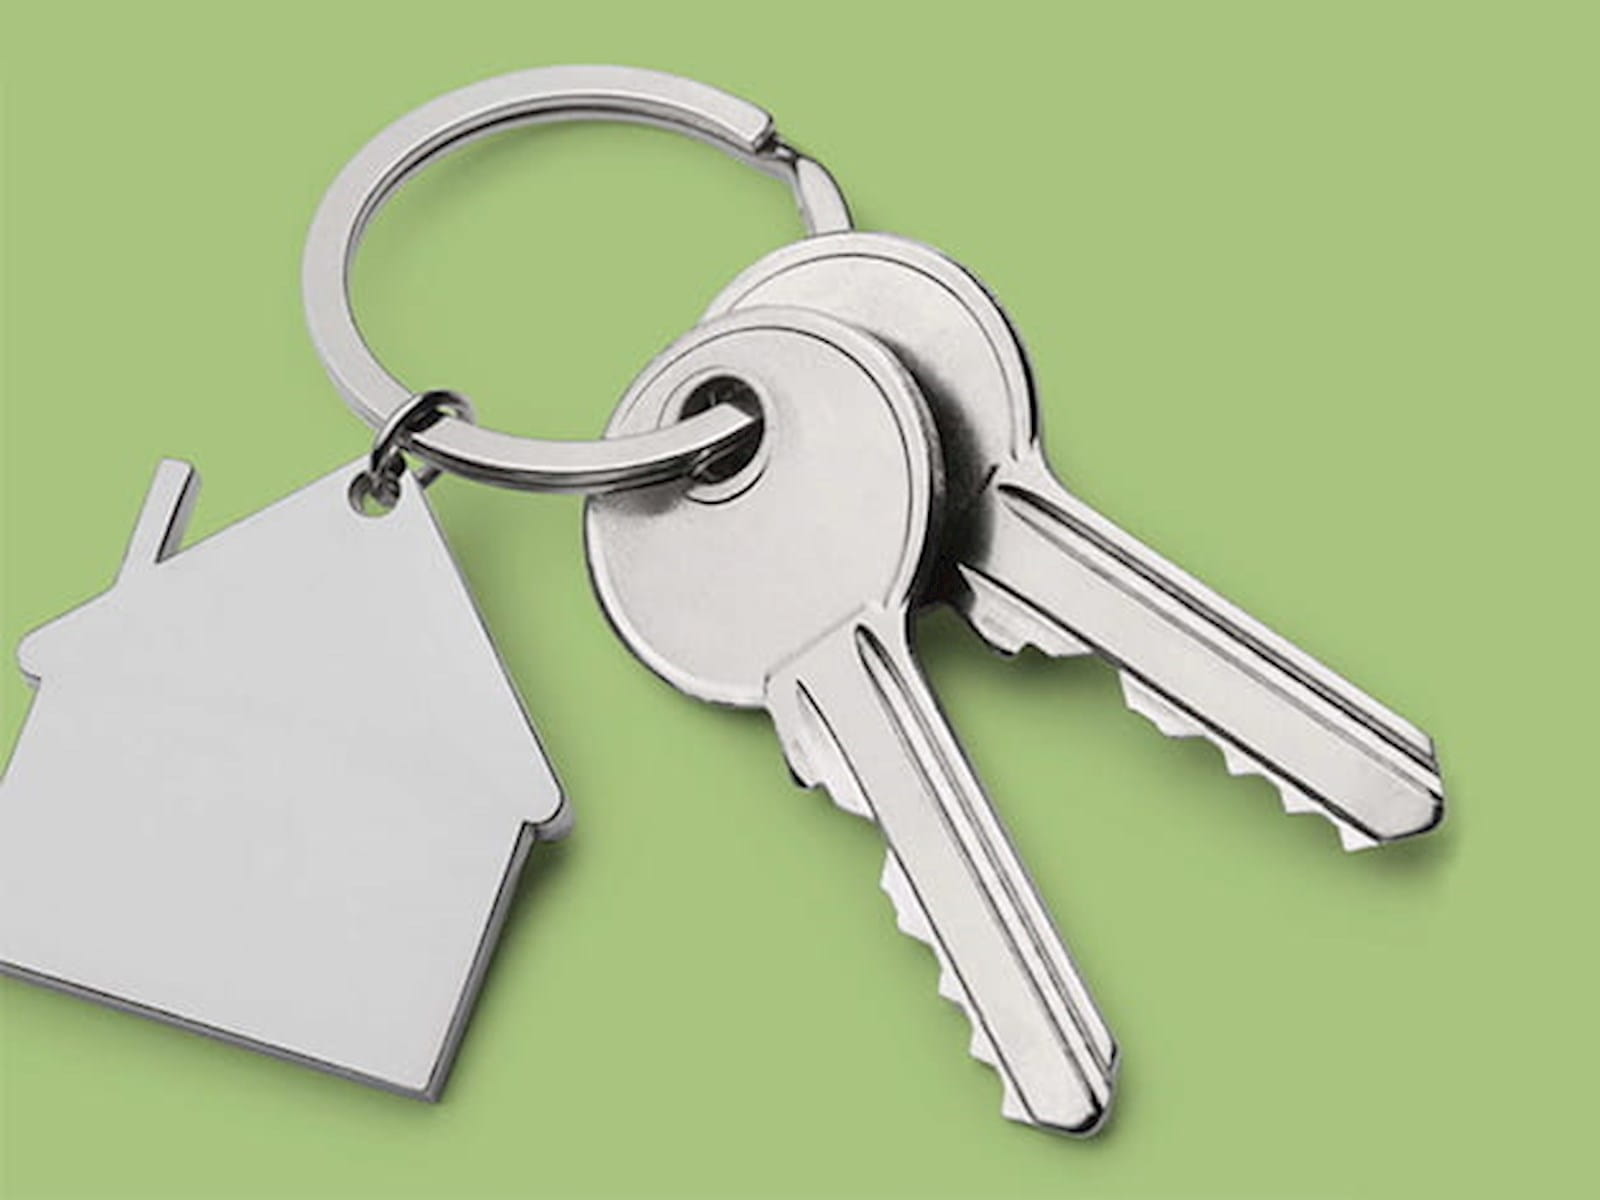 Keys with a house-shaped key ring